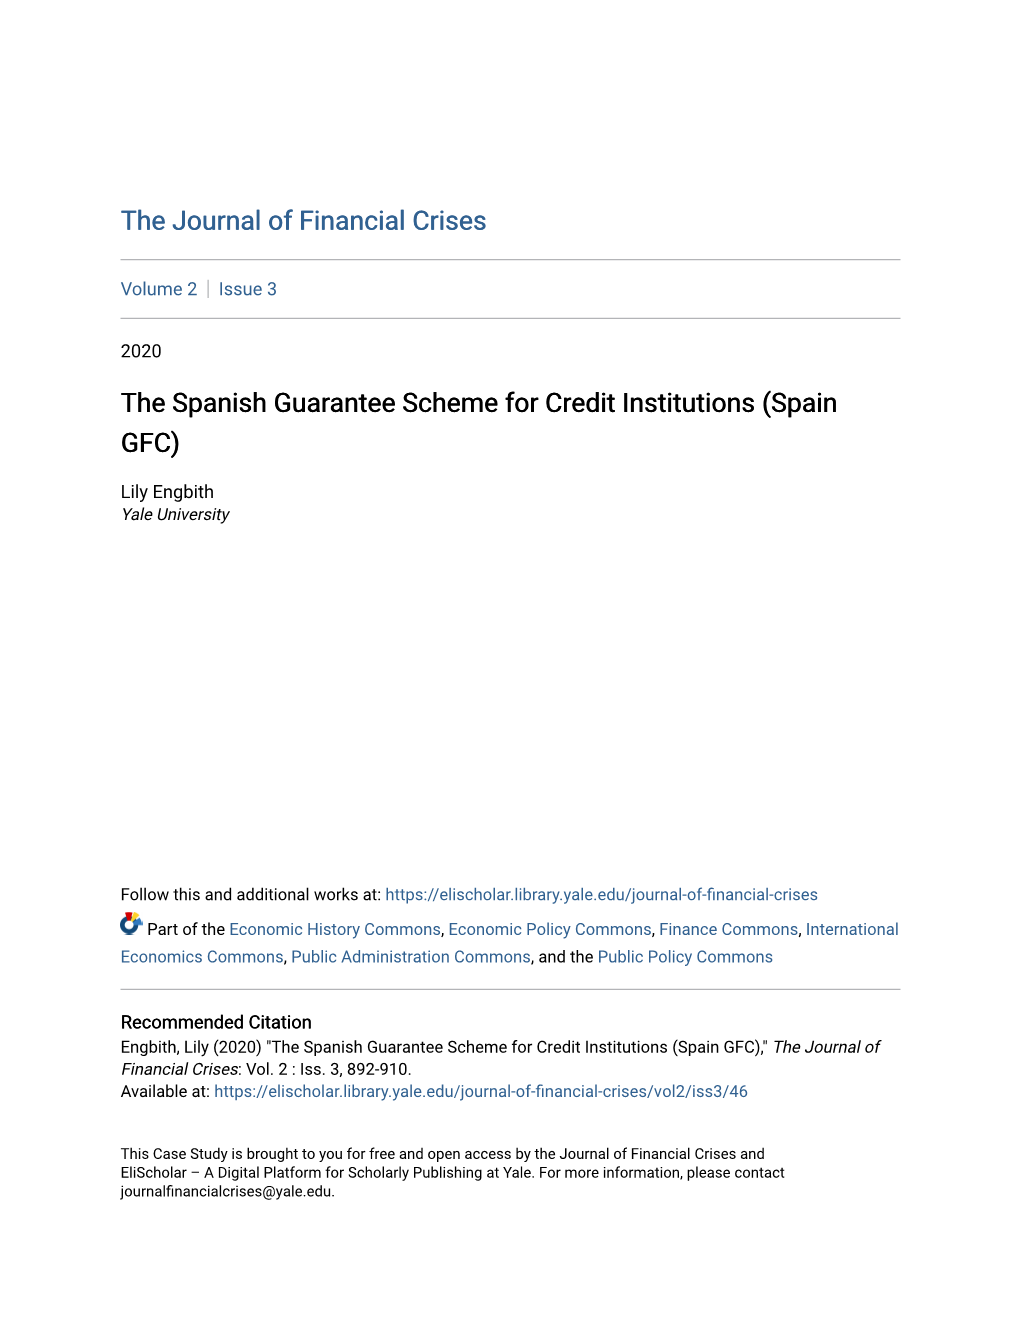 The Spanish Guarantee Scheme for Credit Institutions (Spain GFC)